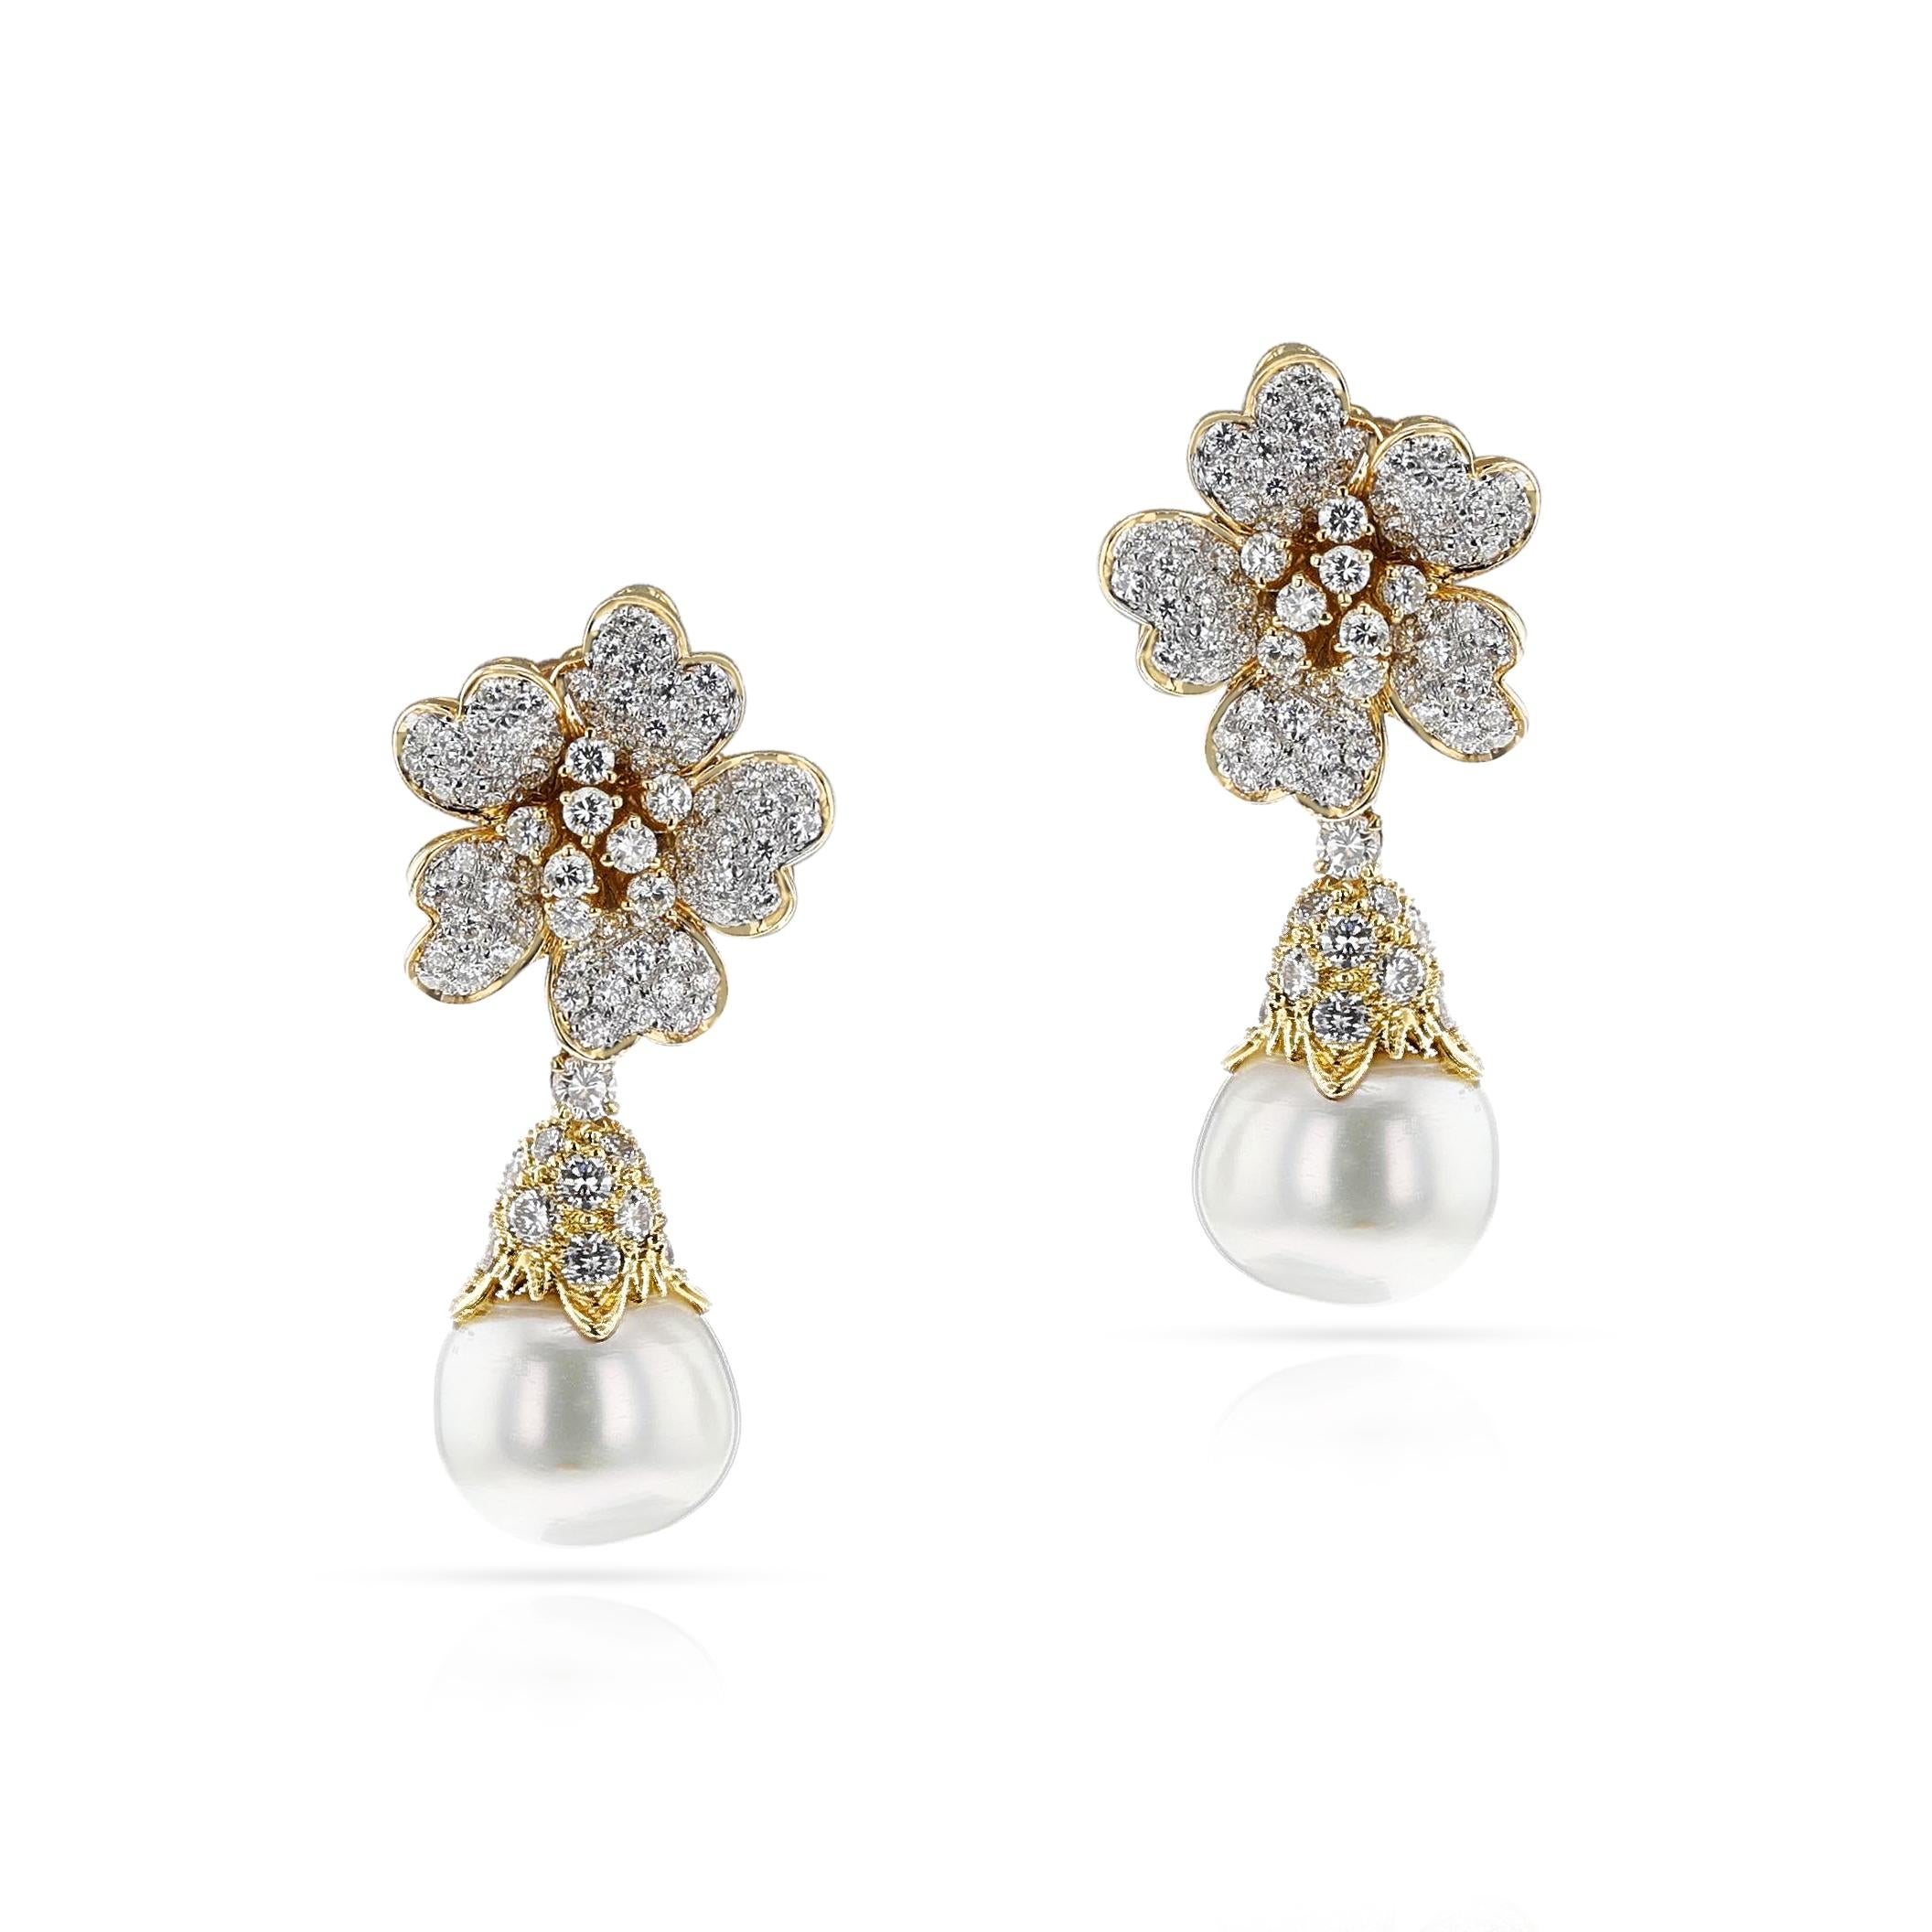 A pair of Pearl and Diamond Day and Night Earrings made in 18k Yellow Gold. The Diamonds are G color, VS clarity, appx. 4.50 carats. The total weight of the earring is 23.17 grams and the length is 1.75.